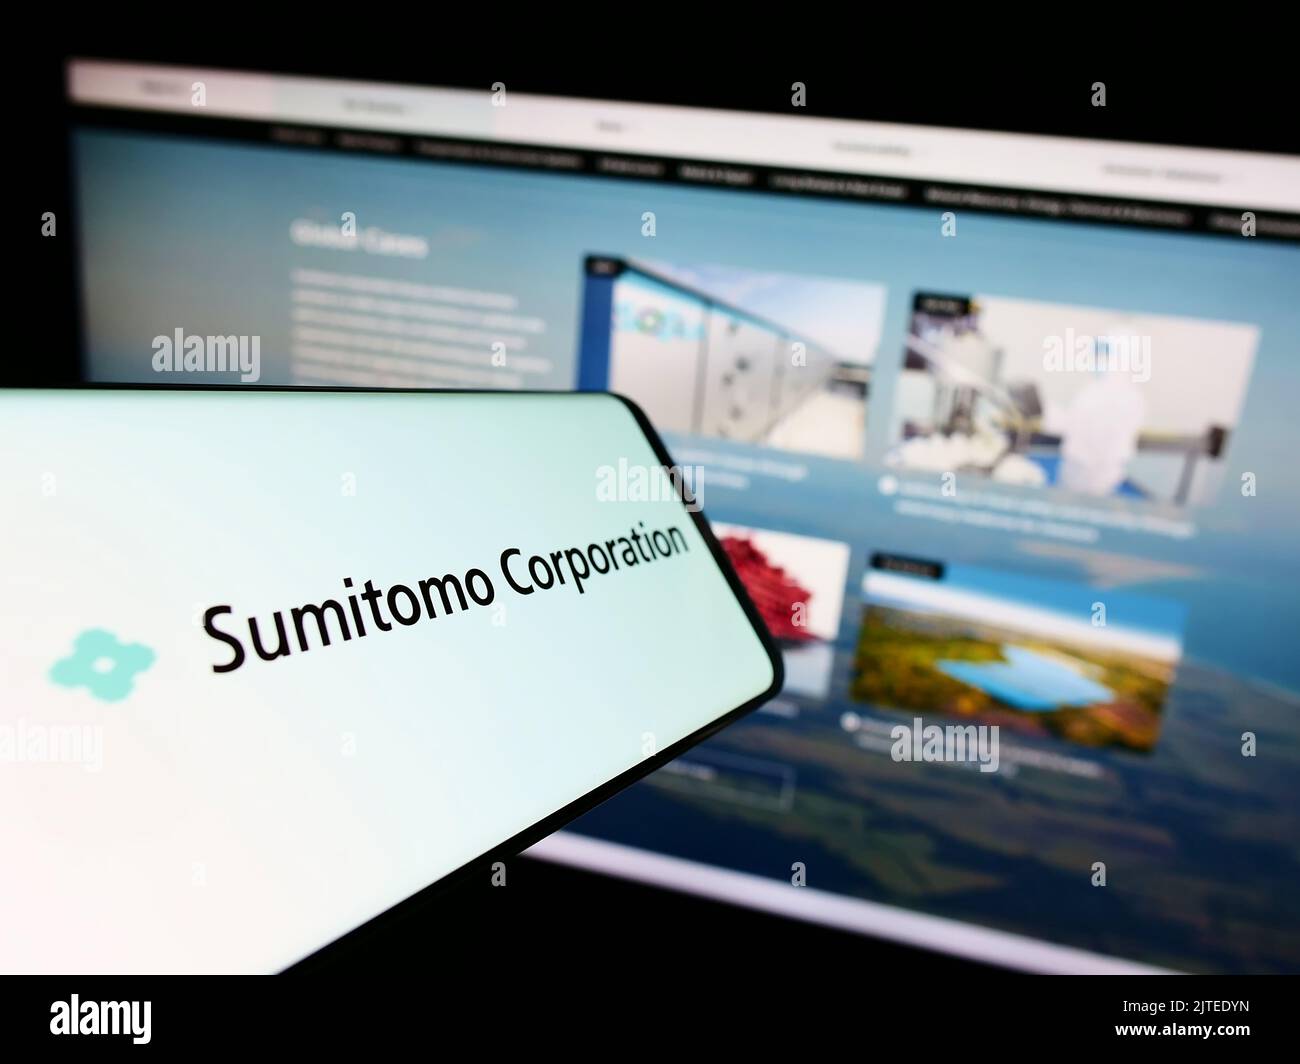 Smartphone with logo of Japanese company Sumitomo Corporation on screen in front of business website. Focus on center of phone display. Stock Photo